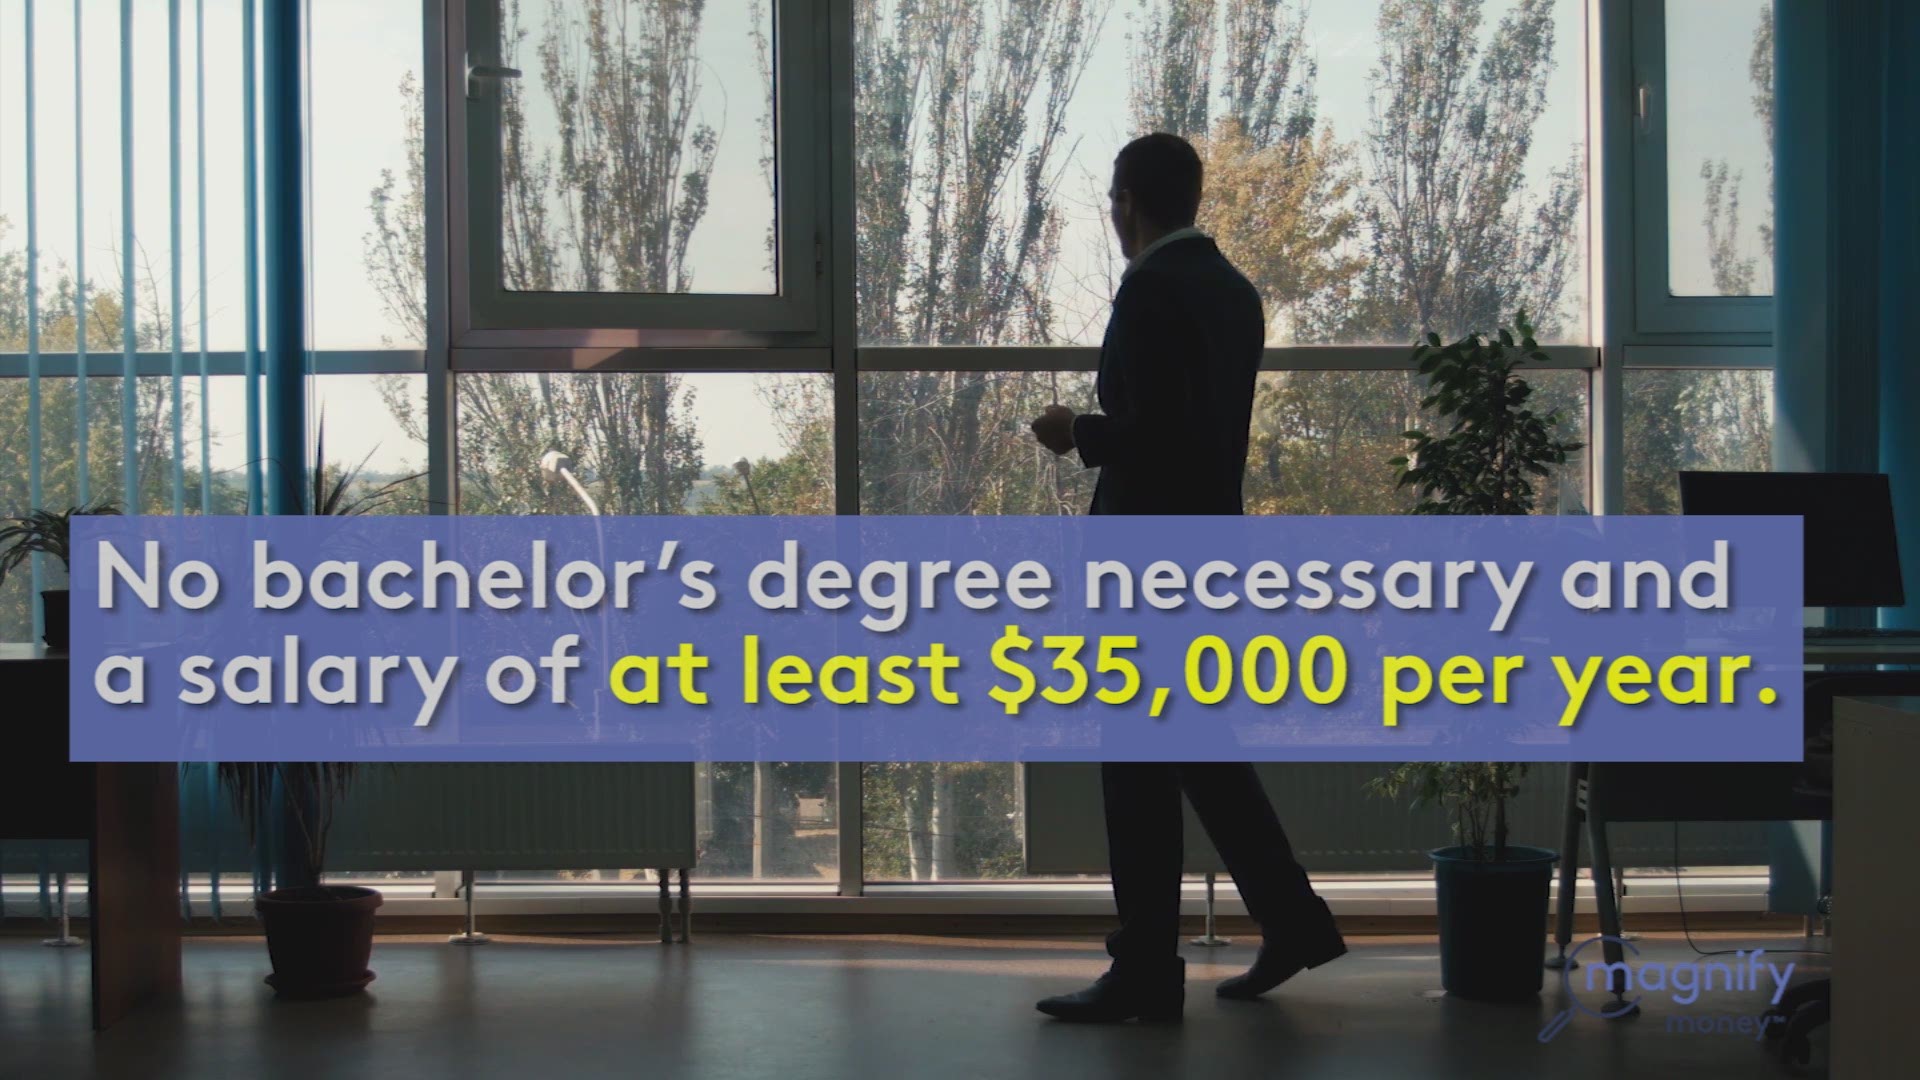 There are plenty of good jobs to be had that don't require a bachelor's degree. Video by MagnifyMoney.